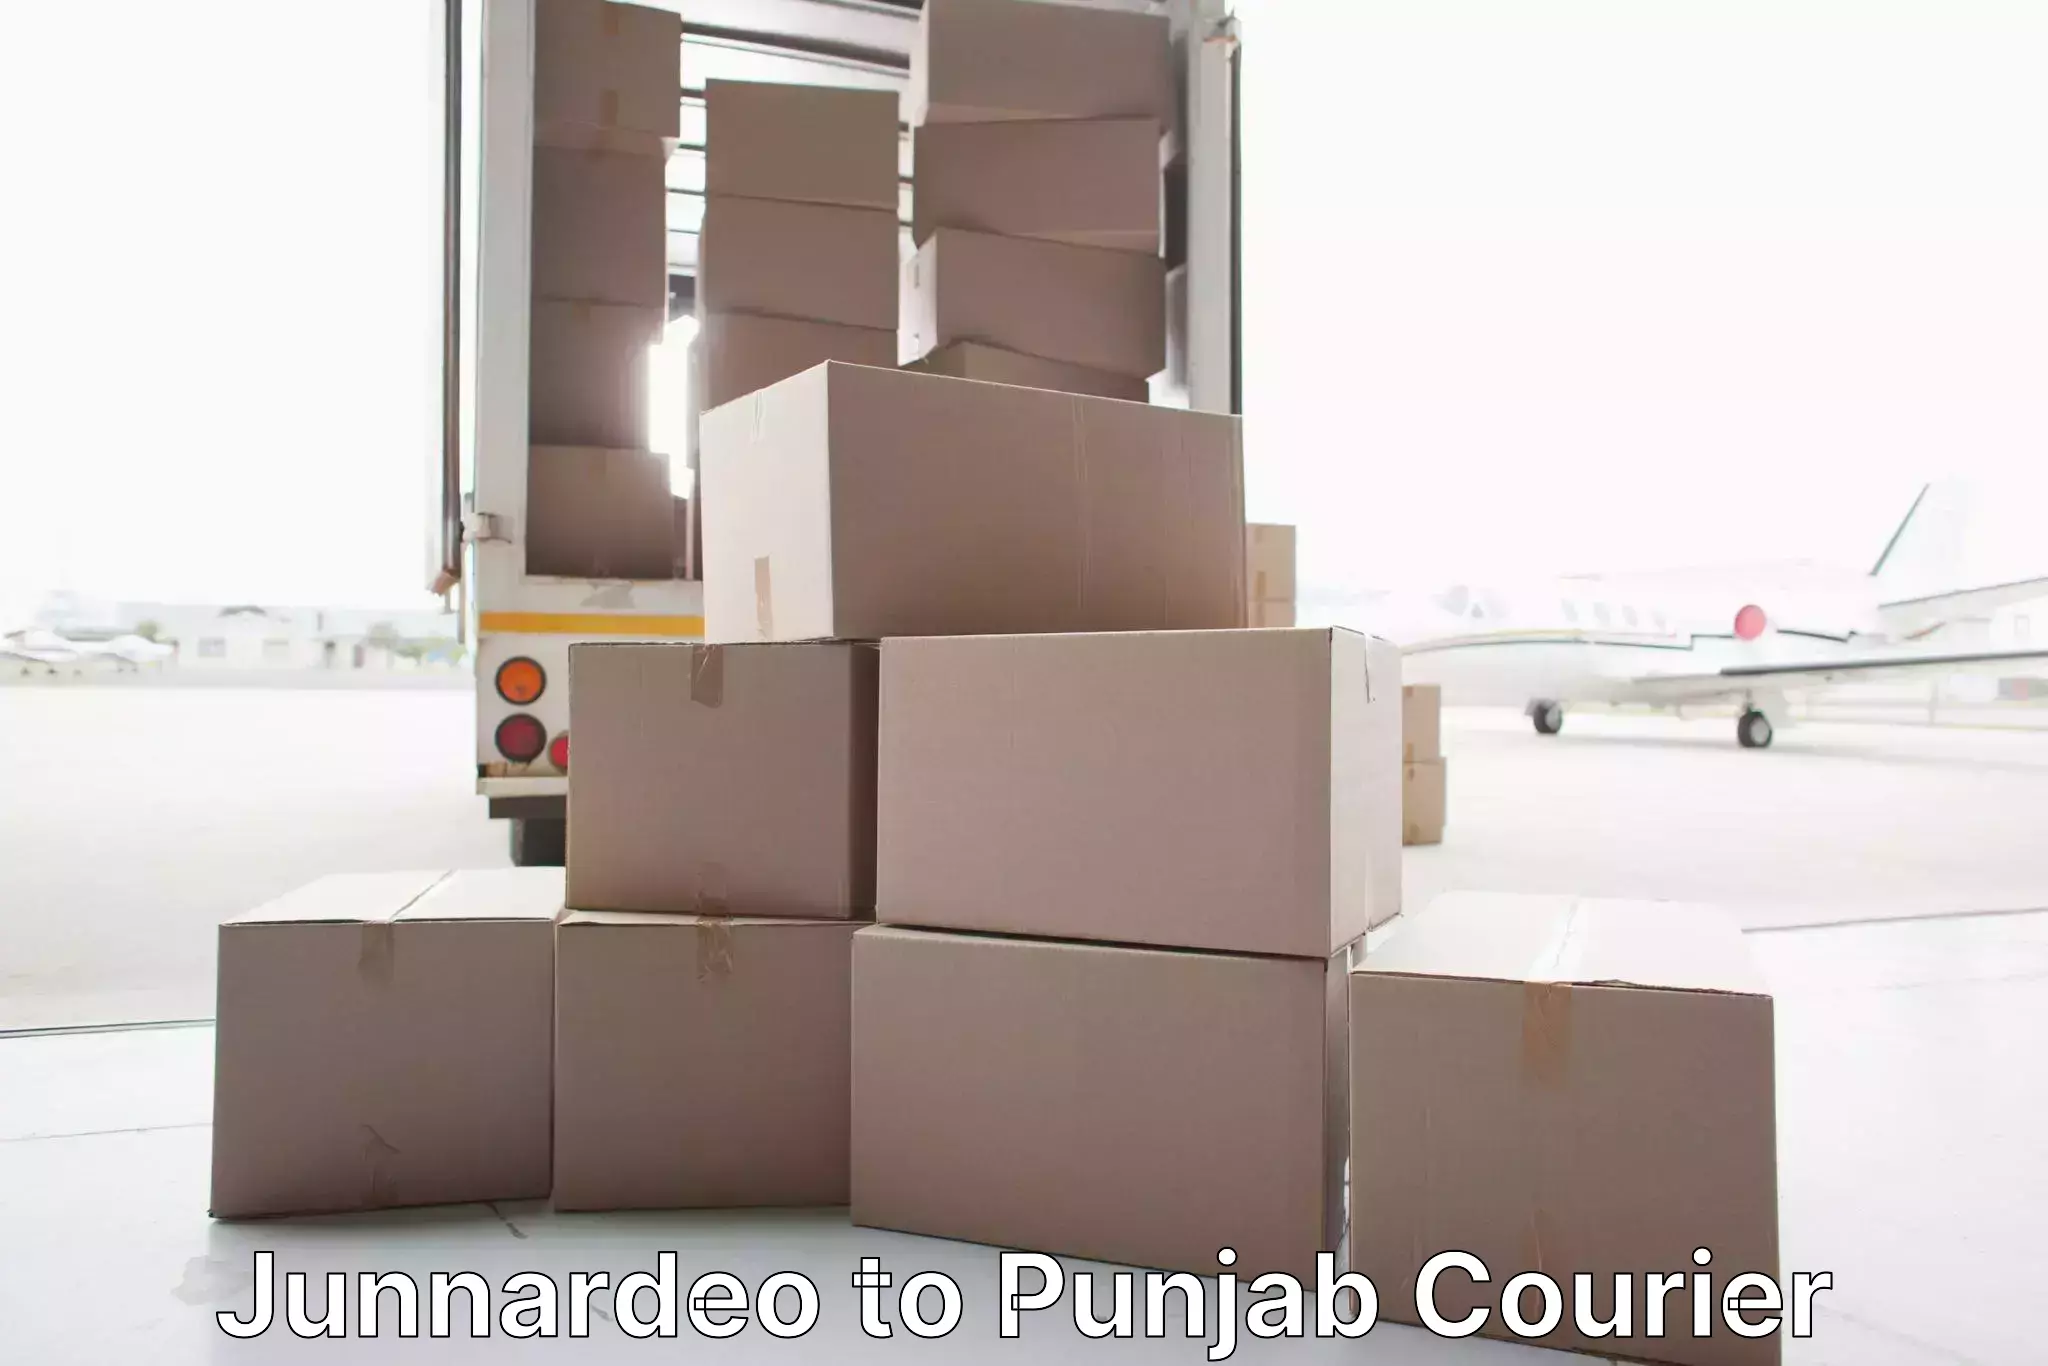 Professional packing services Junnardeo to Fatehgarh Sahib